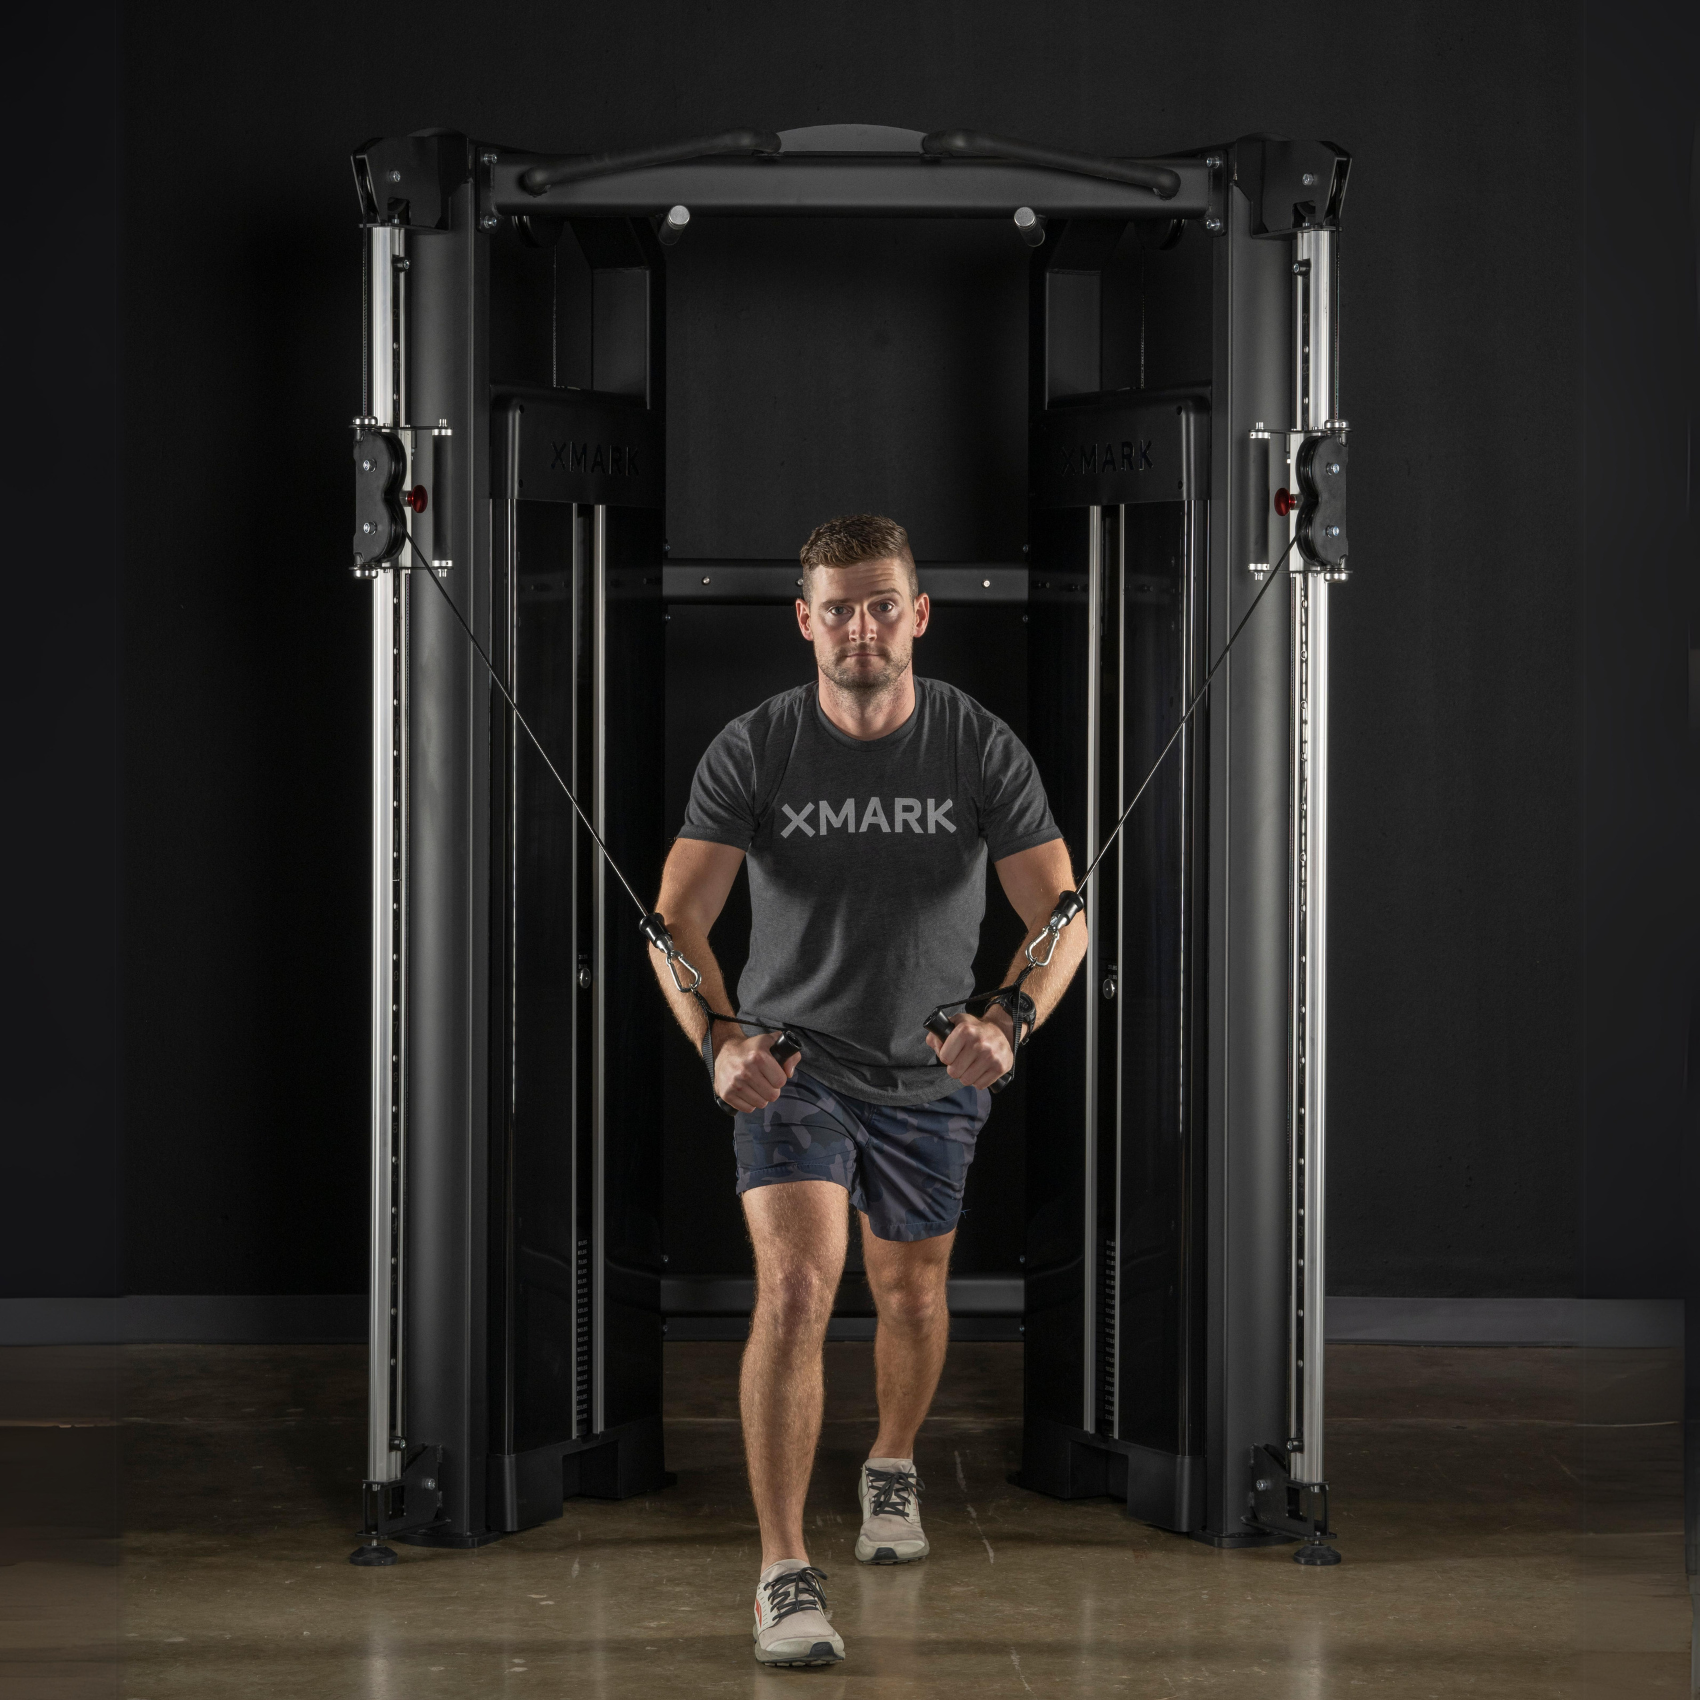 MAN USING A WHOLE-BODY FUNCTIONAL TRAINER TO WORK OUT